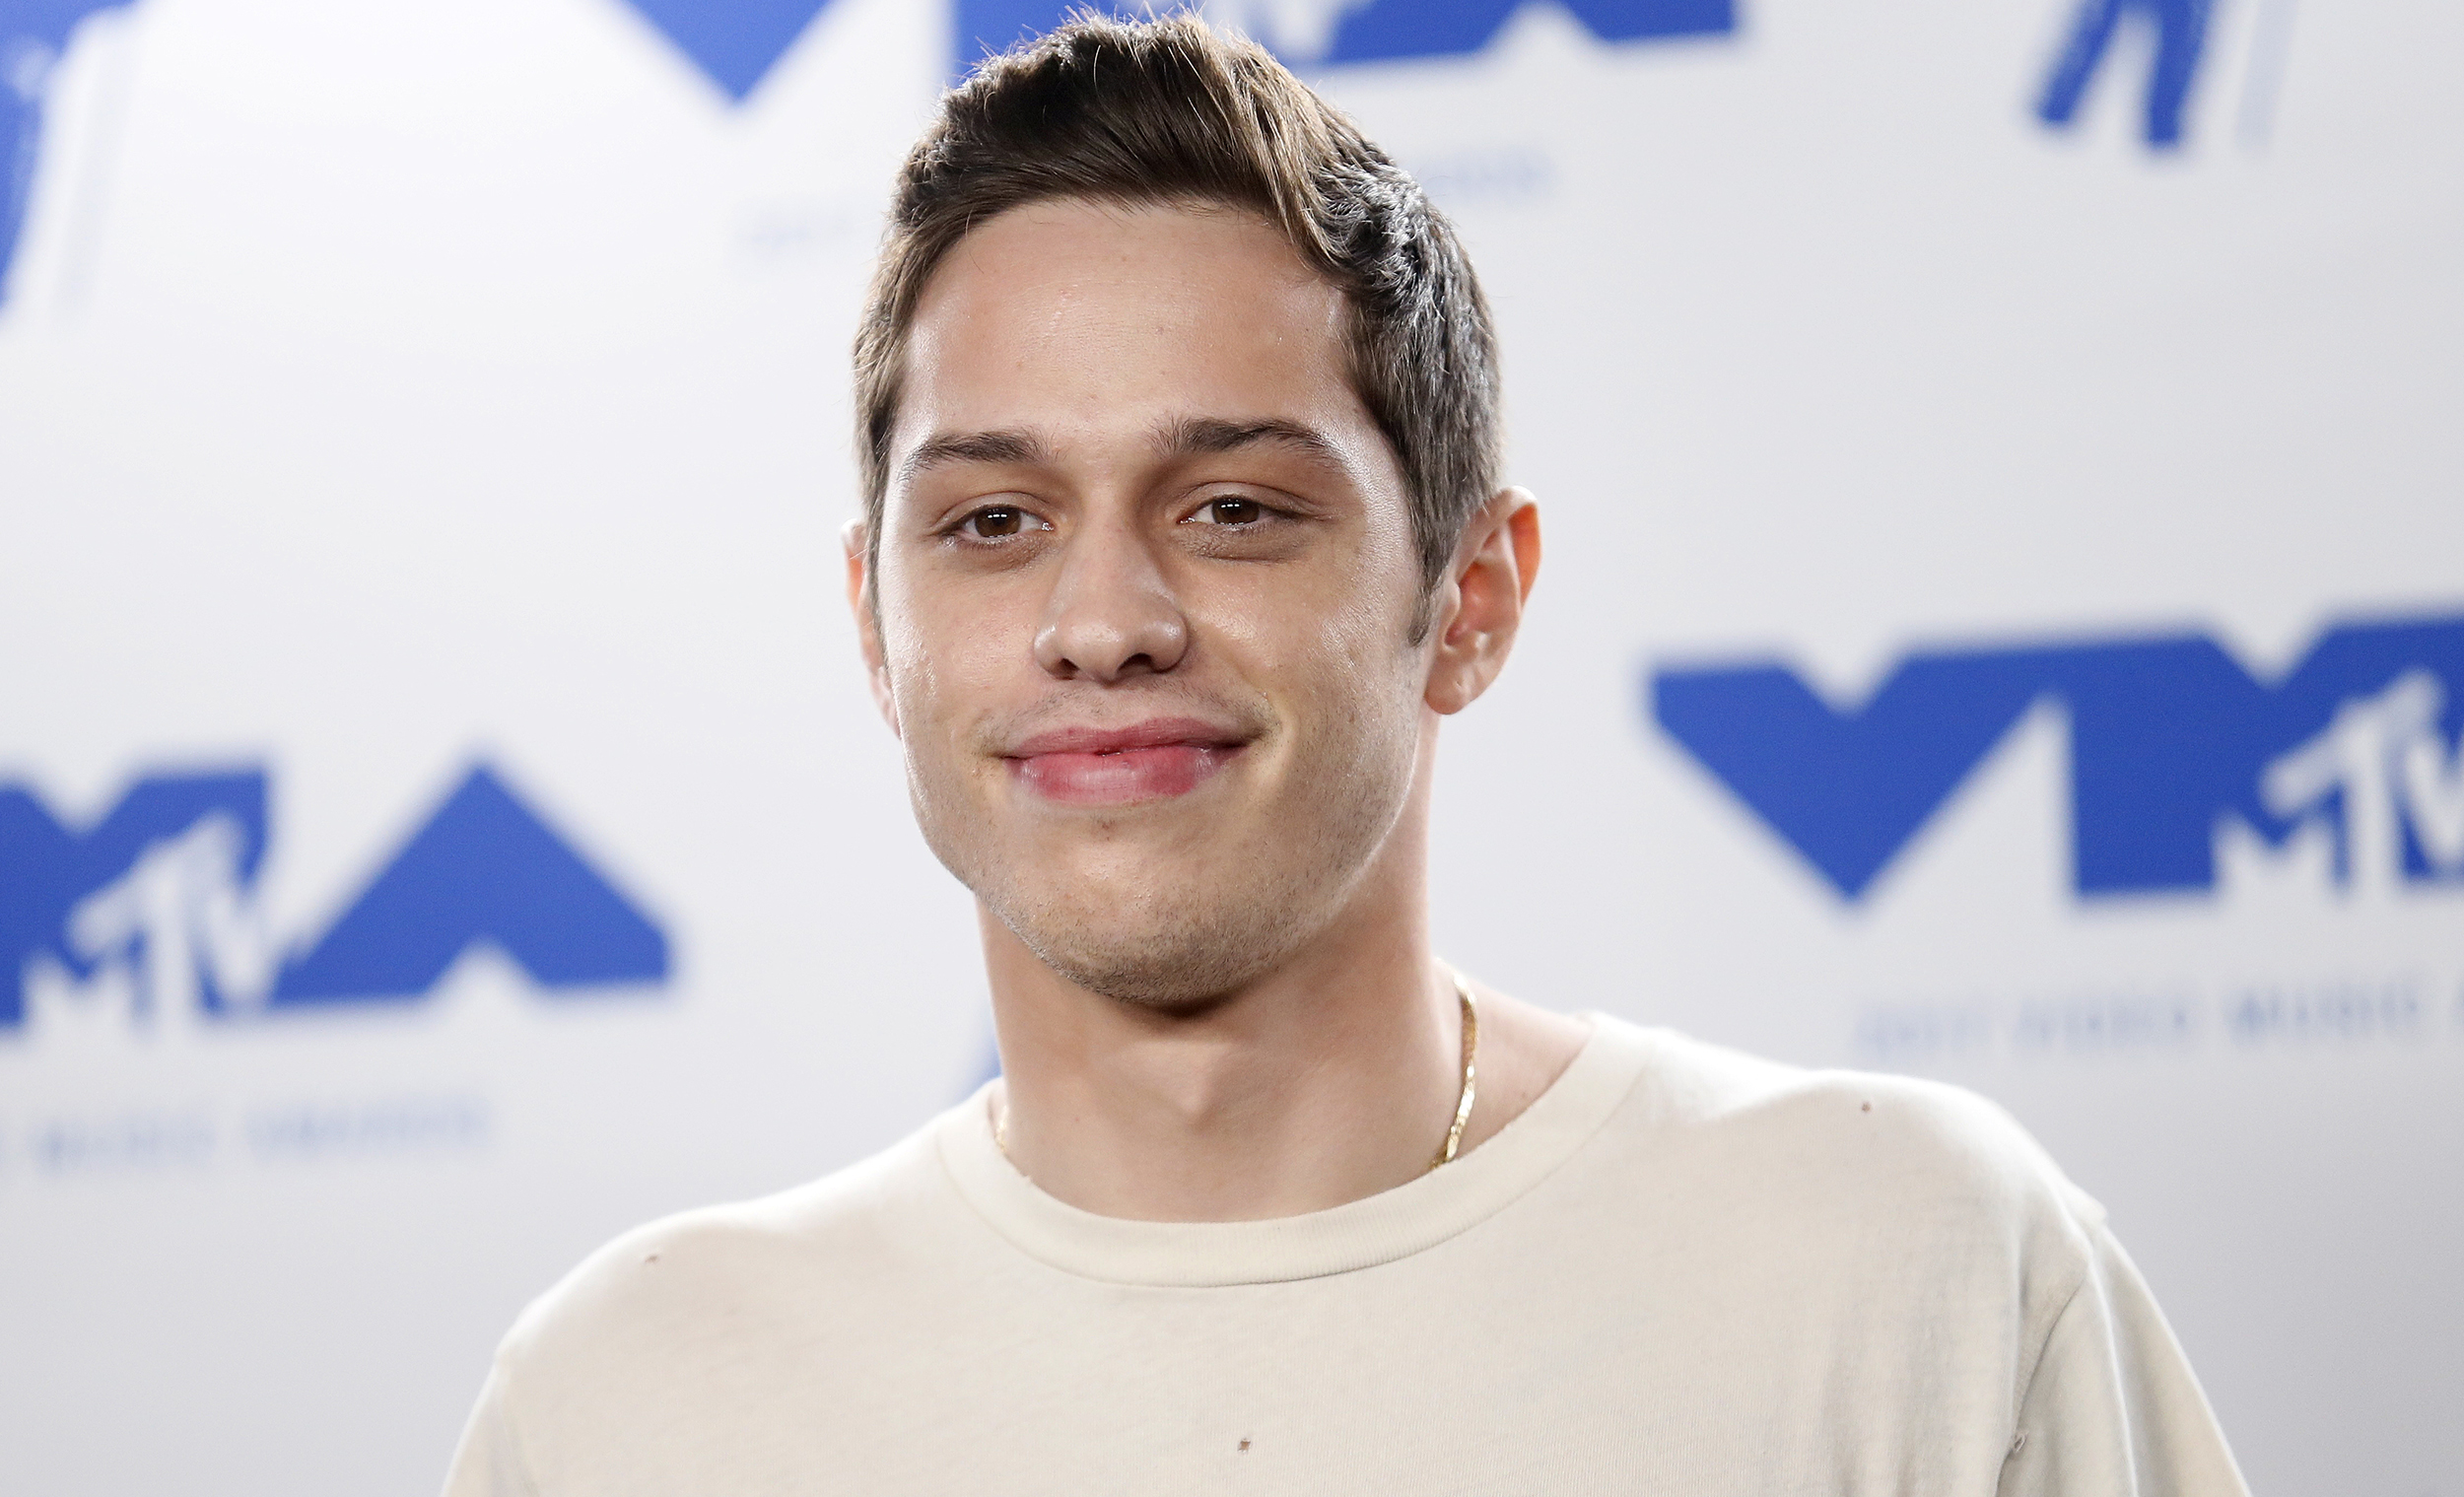 Pete Davidson. I usually go with comedy is subjective, but I've yet to see anything that dude has done that has even made me chuckle a bit. -rmoore911